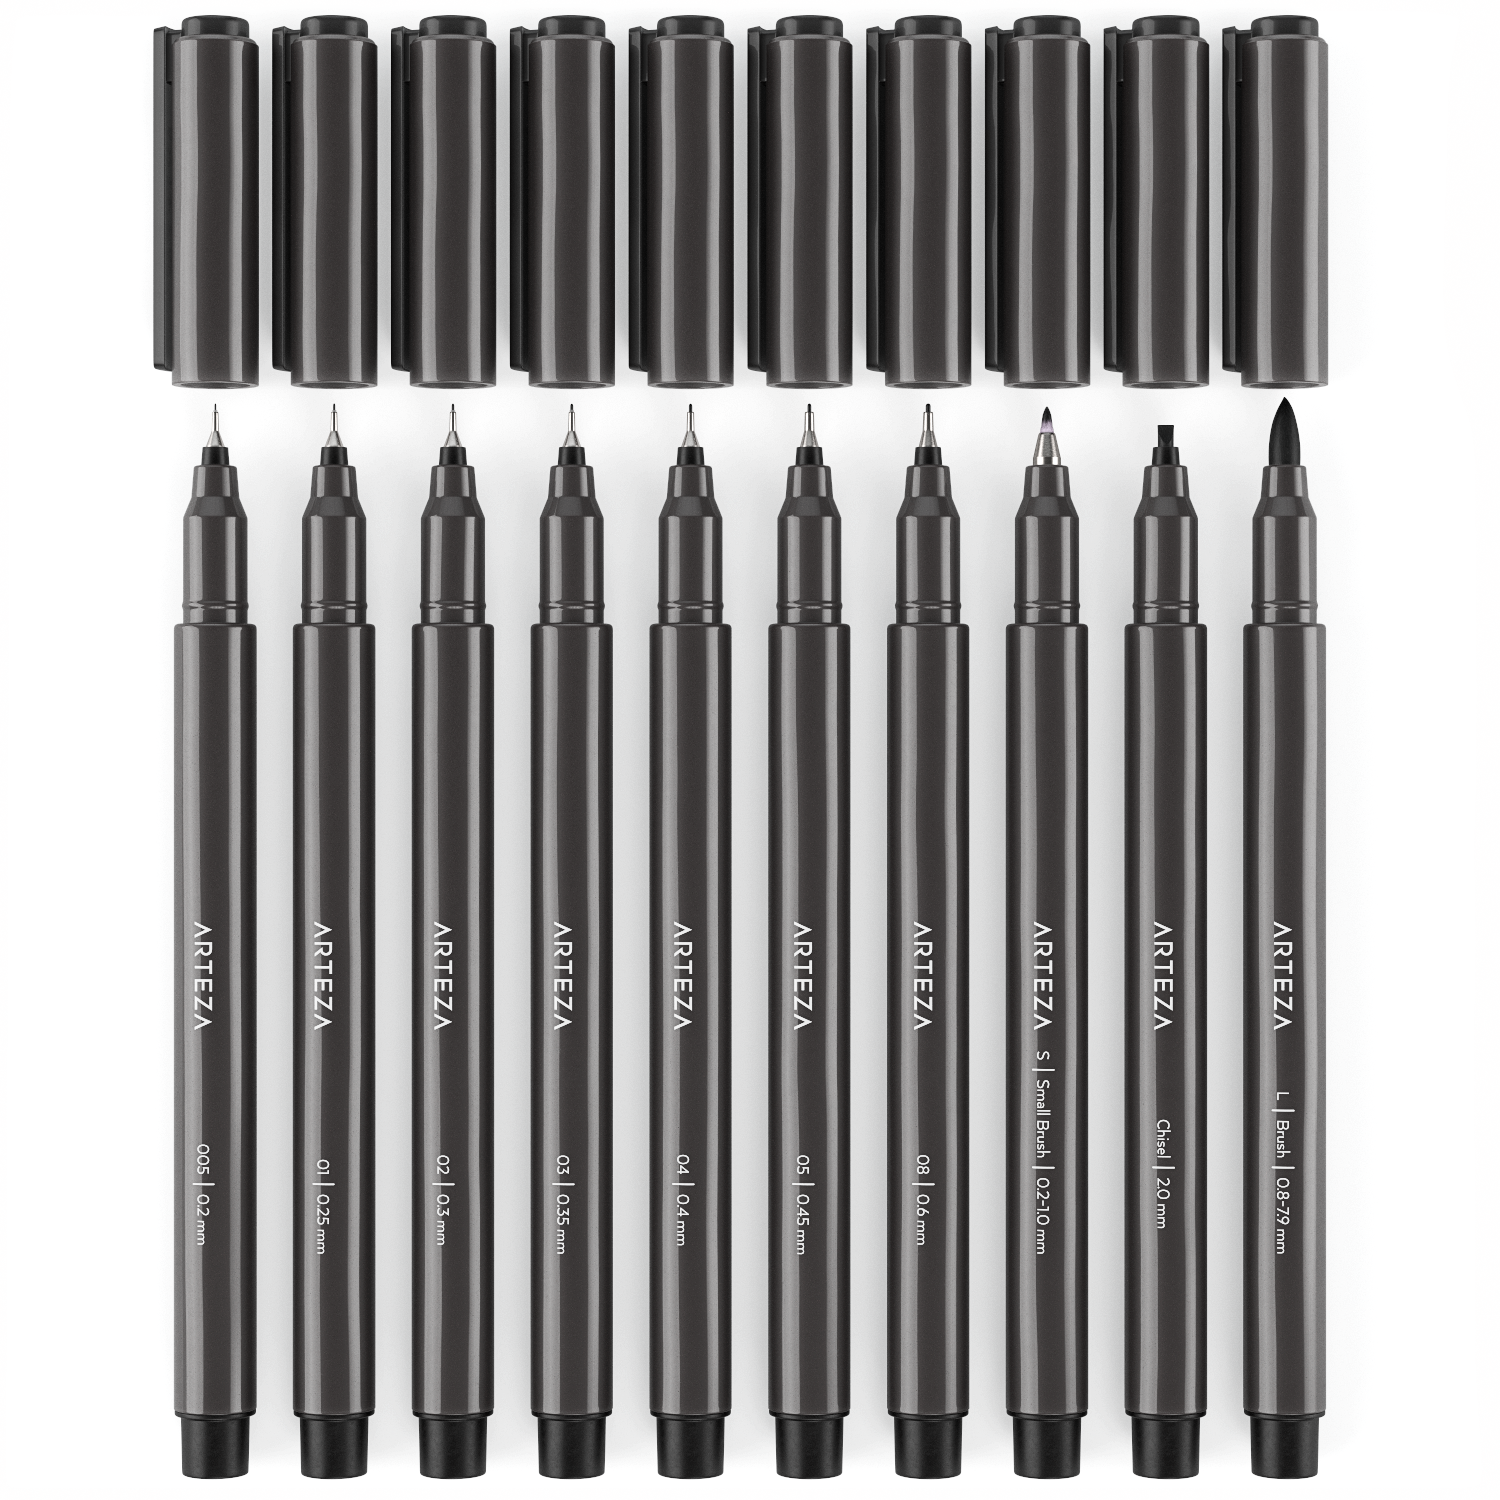 Micron Individual Artist Pens (Multiple Colors & Thickness